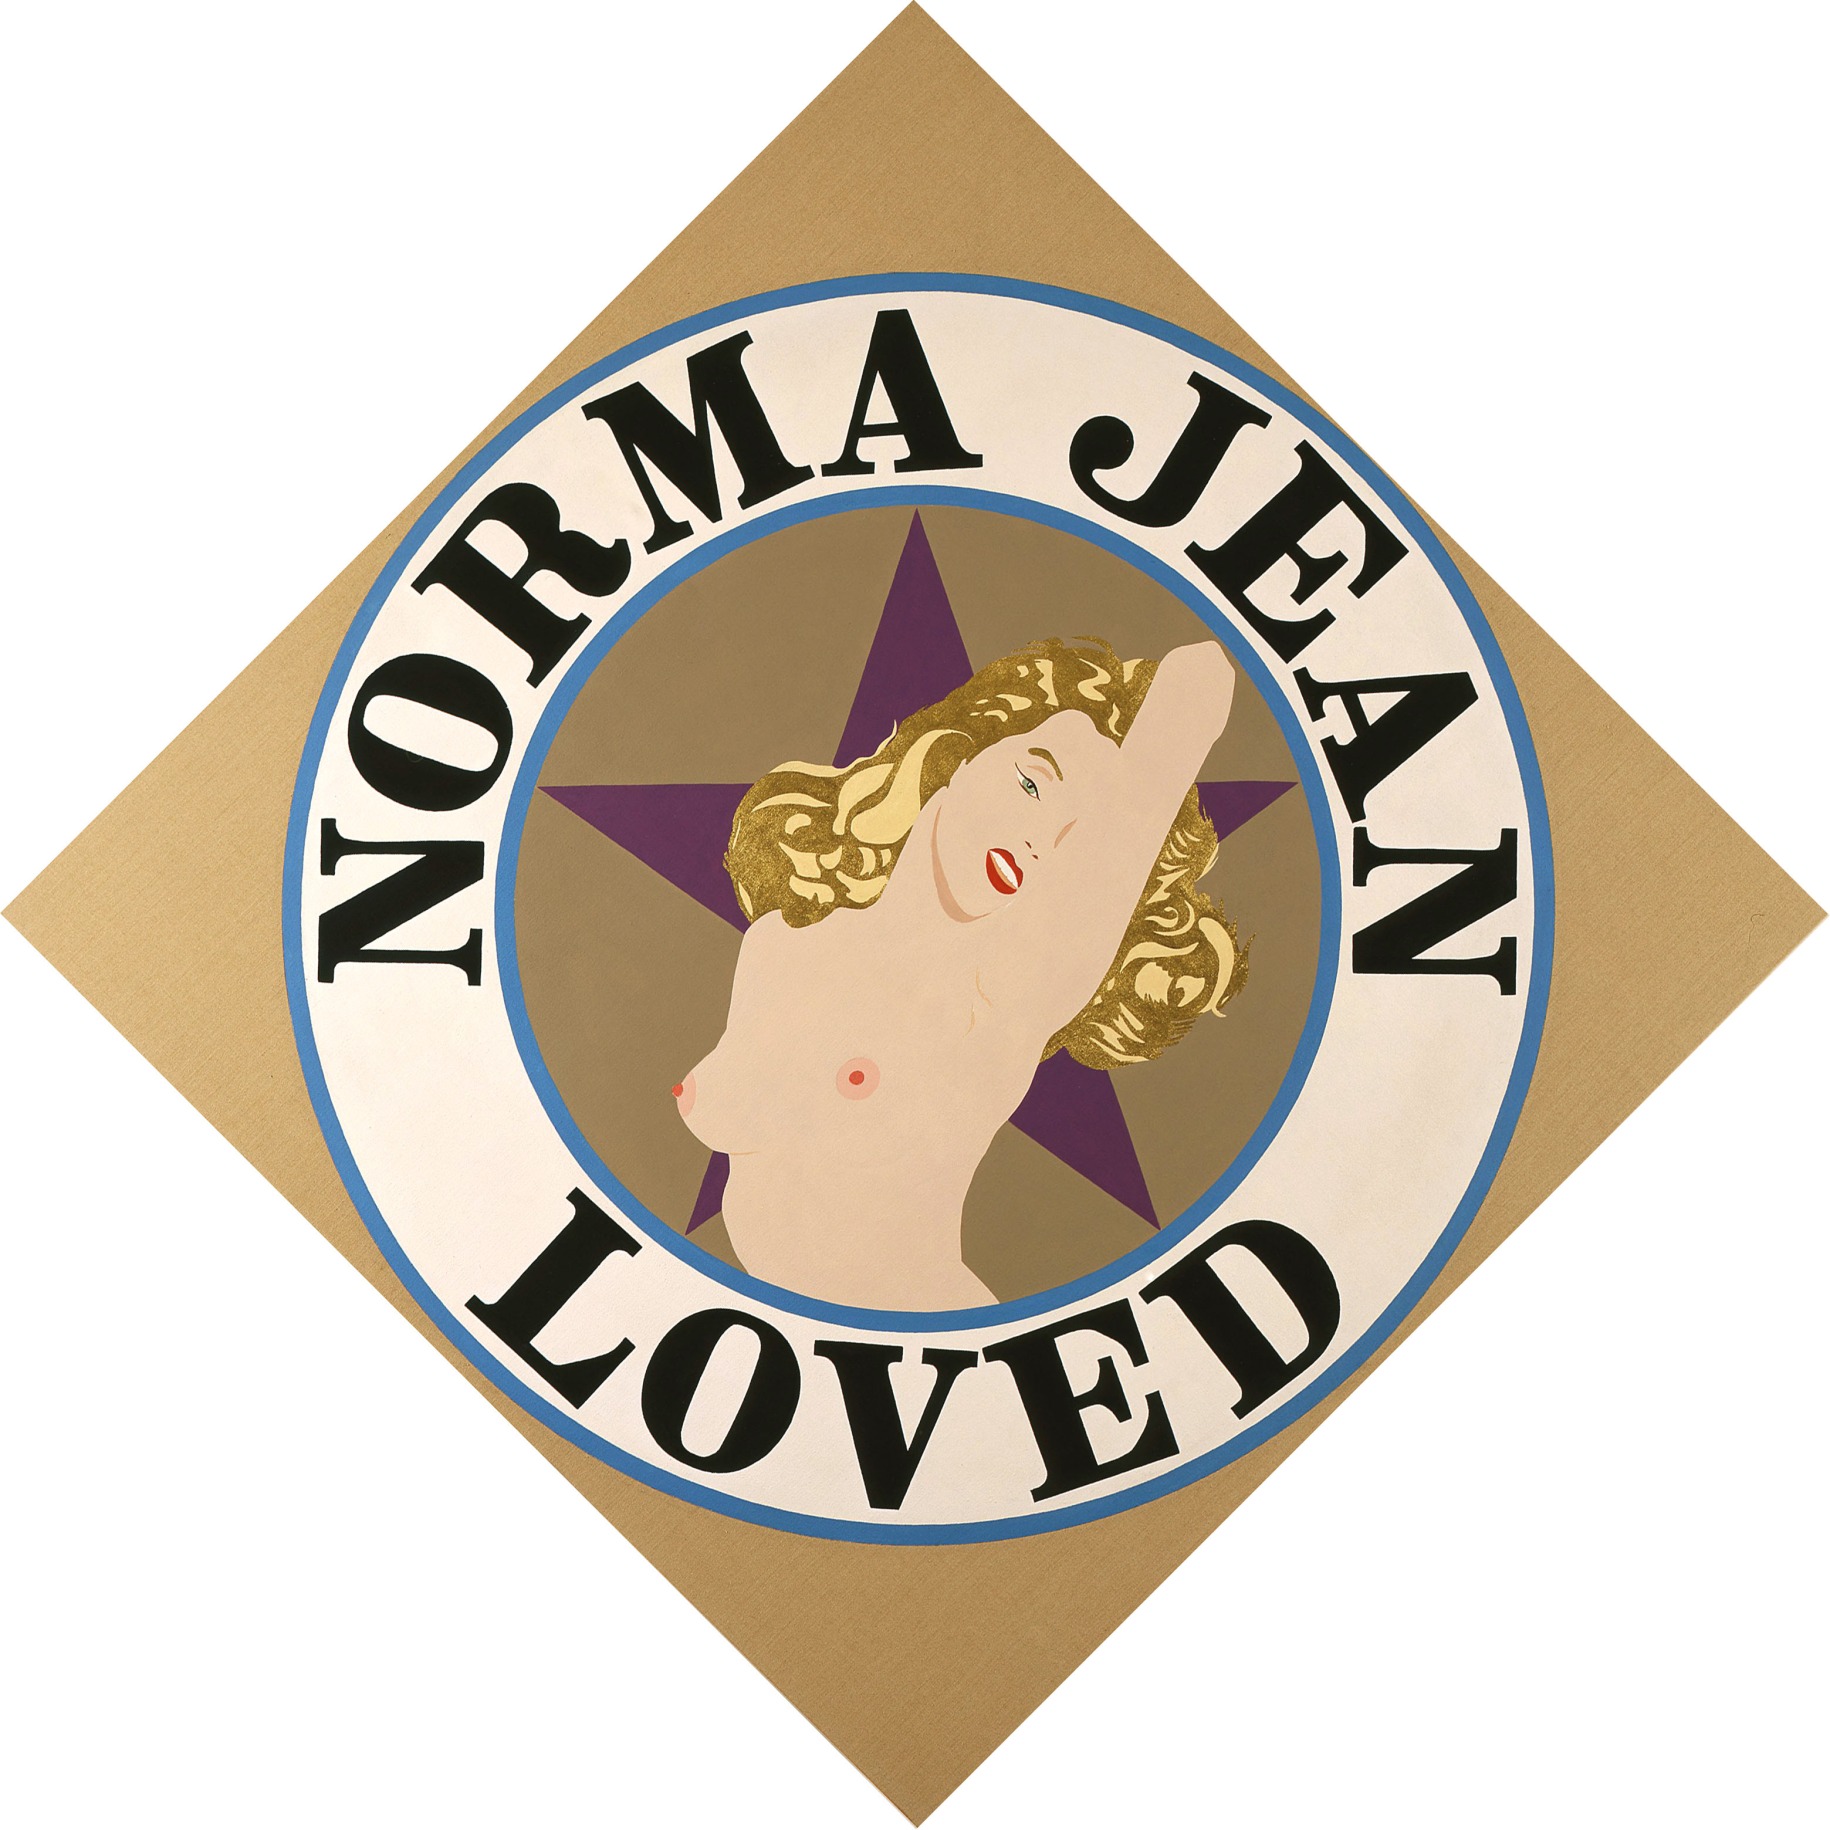 A 68 by 68 inch diamond shaped canvas with a light brown ground. In the center is a topless image of Monroe against a purple star in a light brown circle. Surrounding the circle is a white ring with a blue outlines, containing the painting's title, &quot;Norma Jean Loved&quot; painted in black.